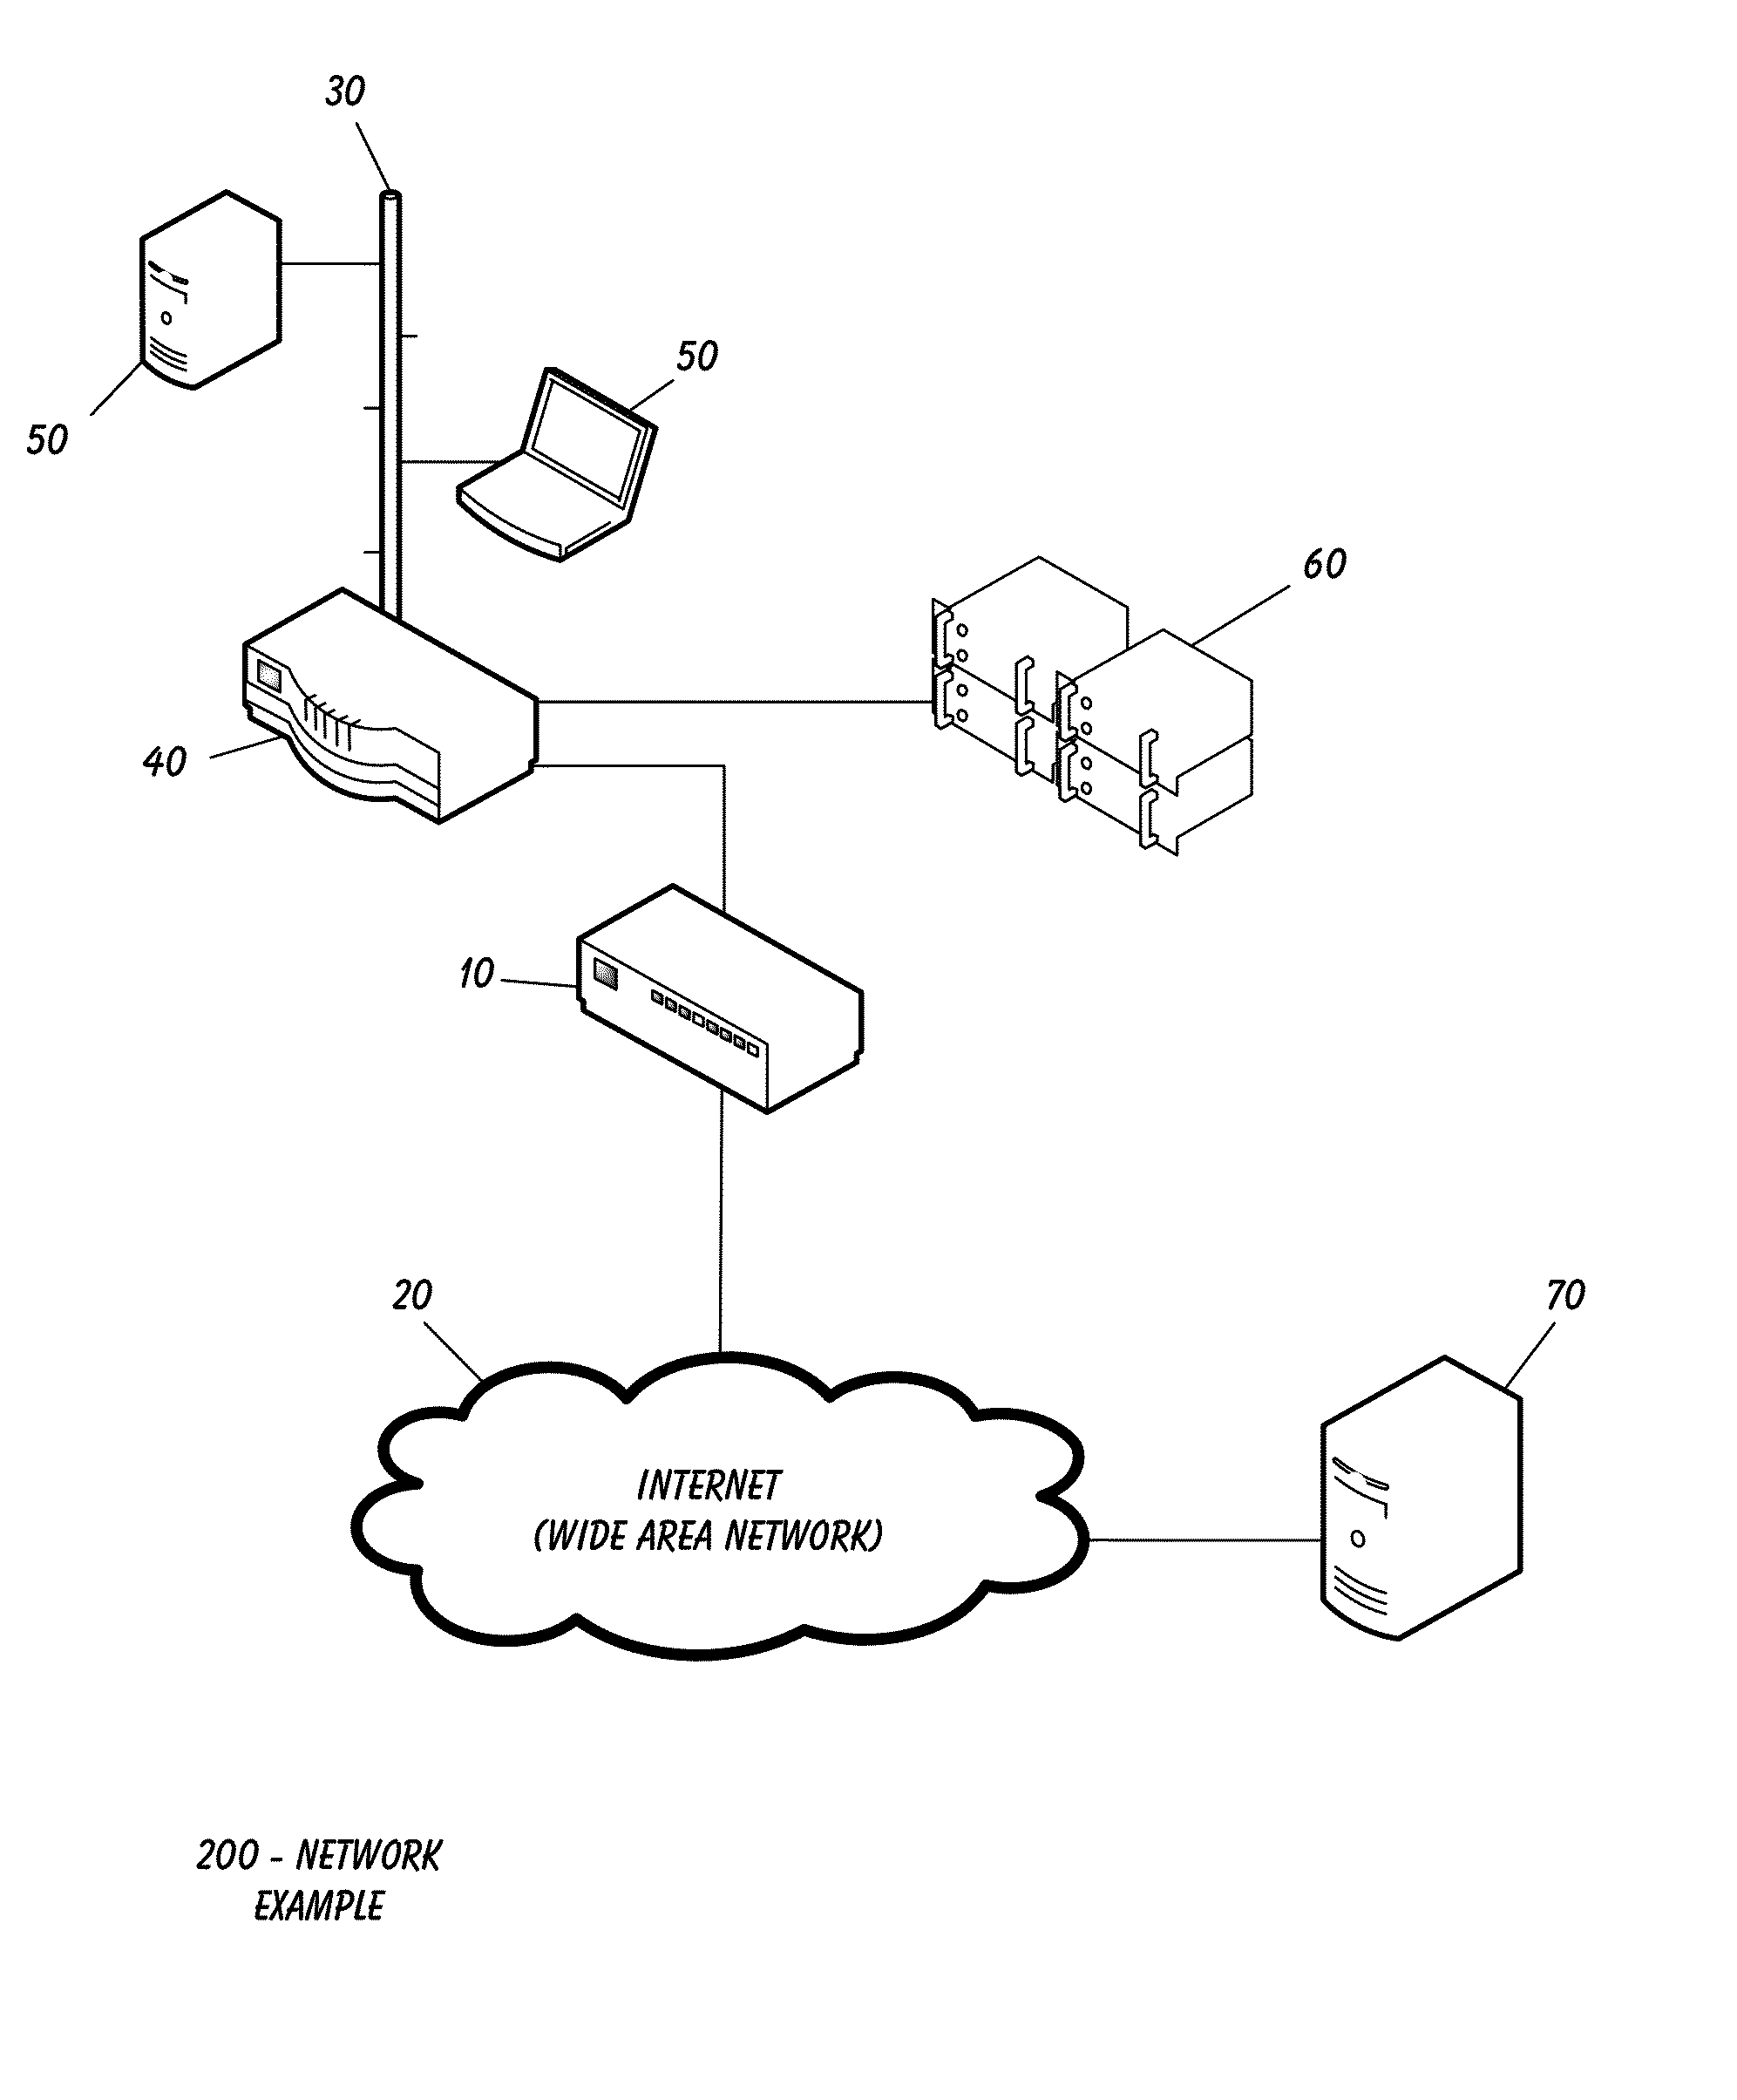 Method And Technique for Automated Collection, Analysis, and Distribution of Network Security Threat Information